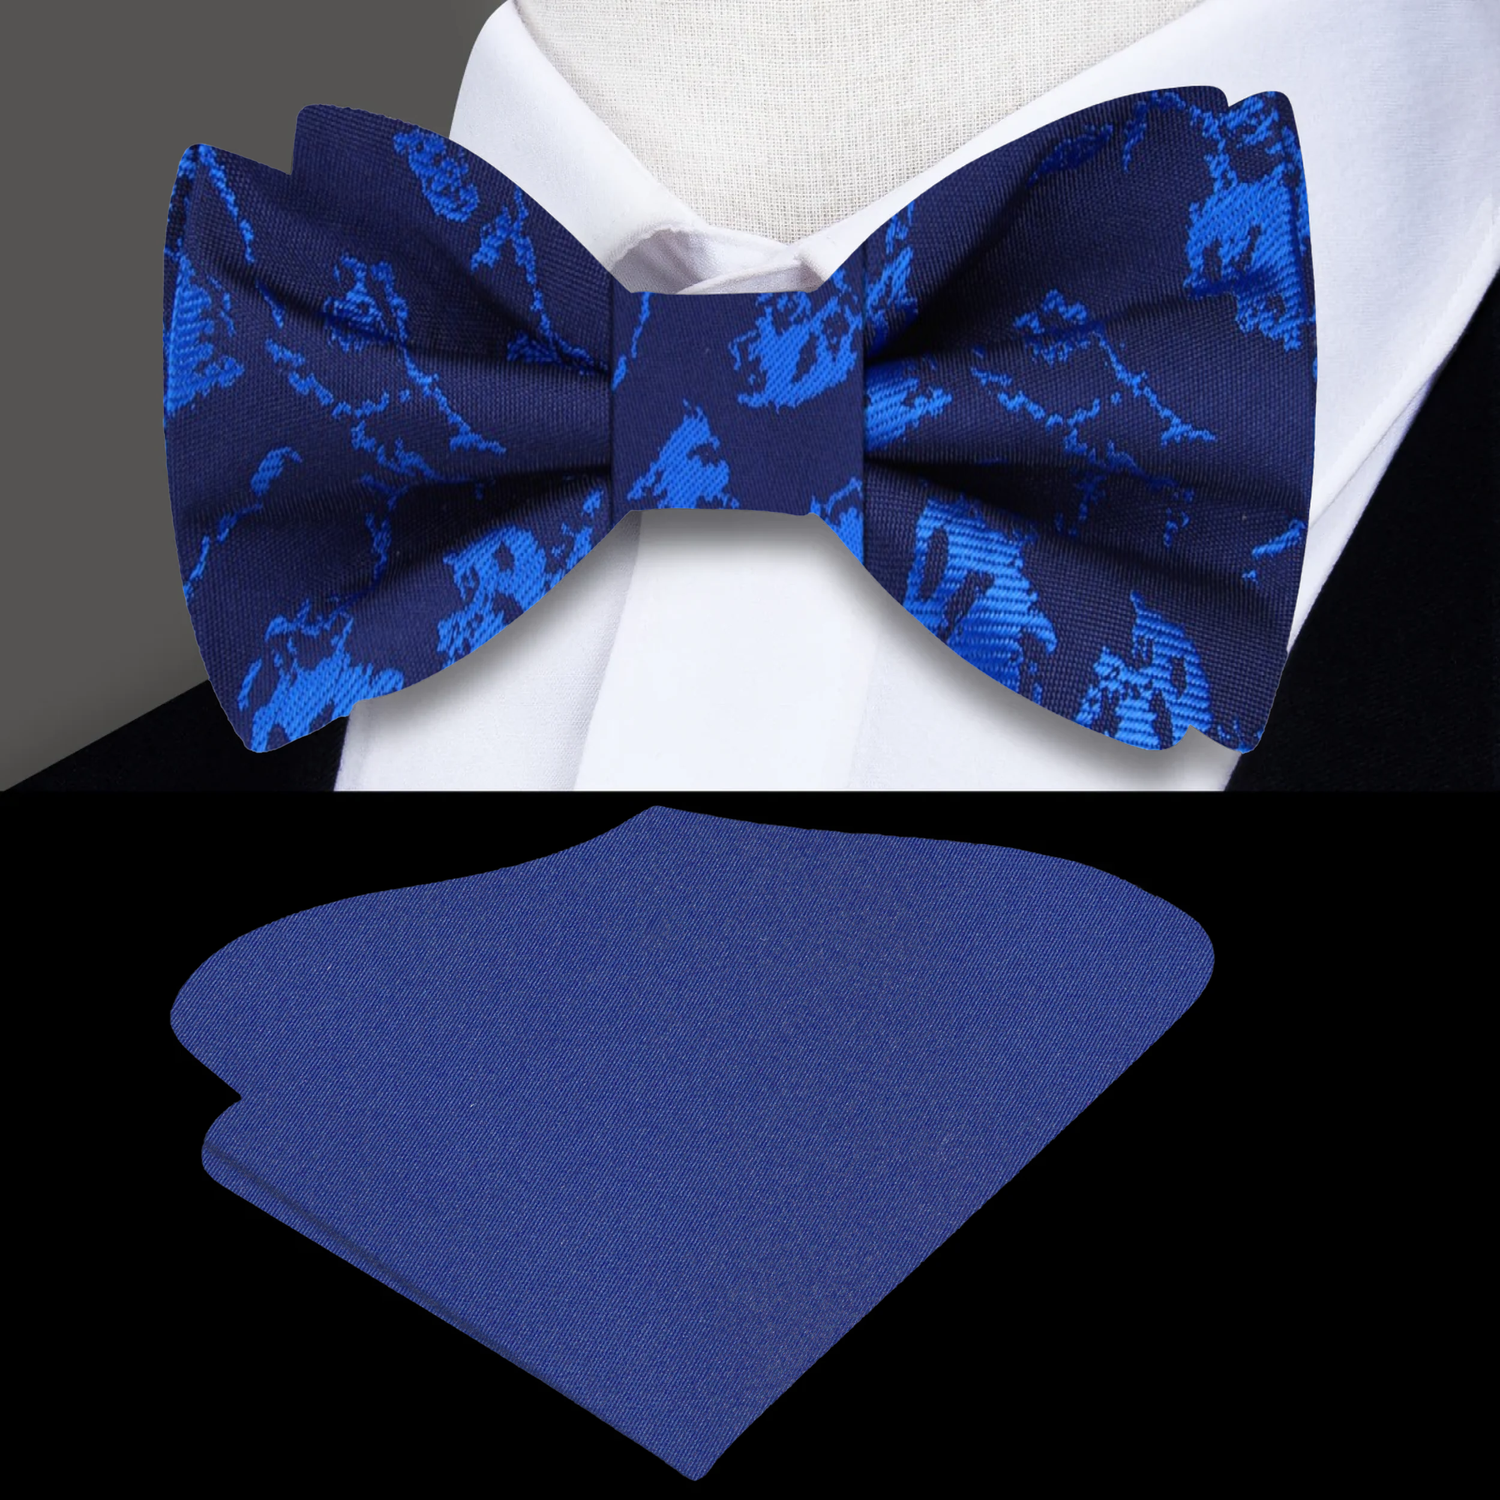 Shades of Blue Abstract Bow Tie and Blue Square